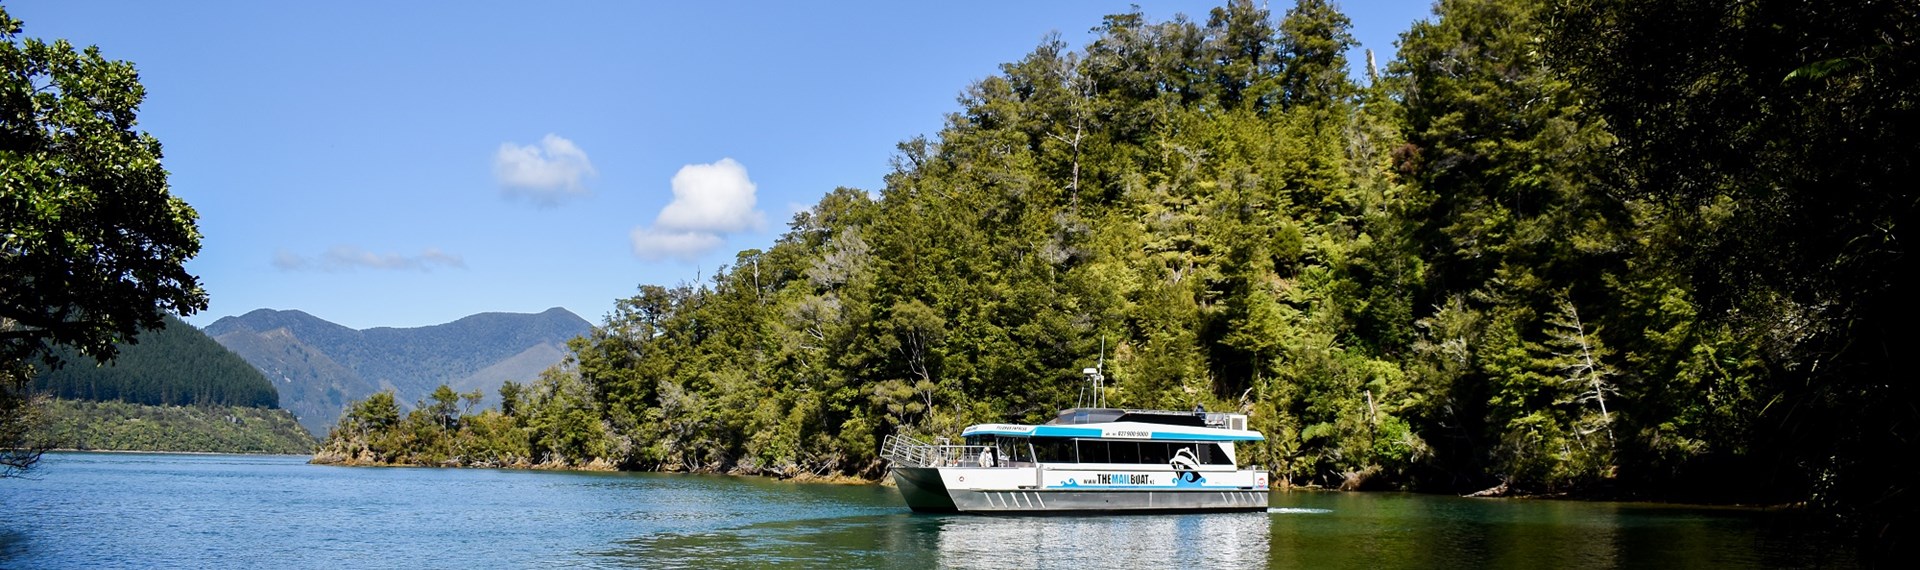 The Pelorus Mail Boat exploring the bays of Pelorus Sound/Te Hoiere.